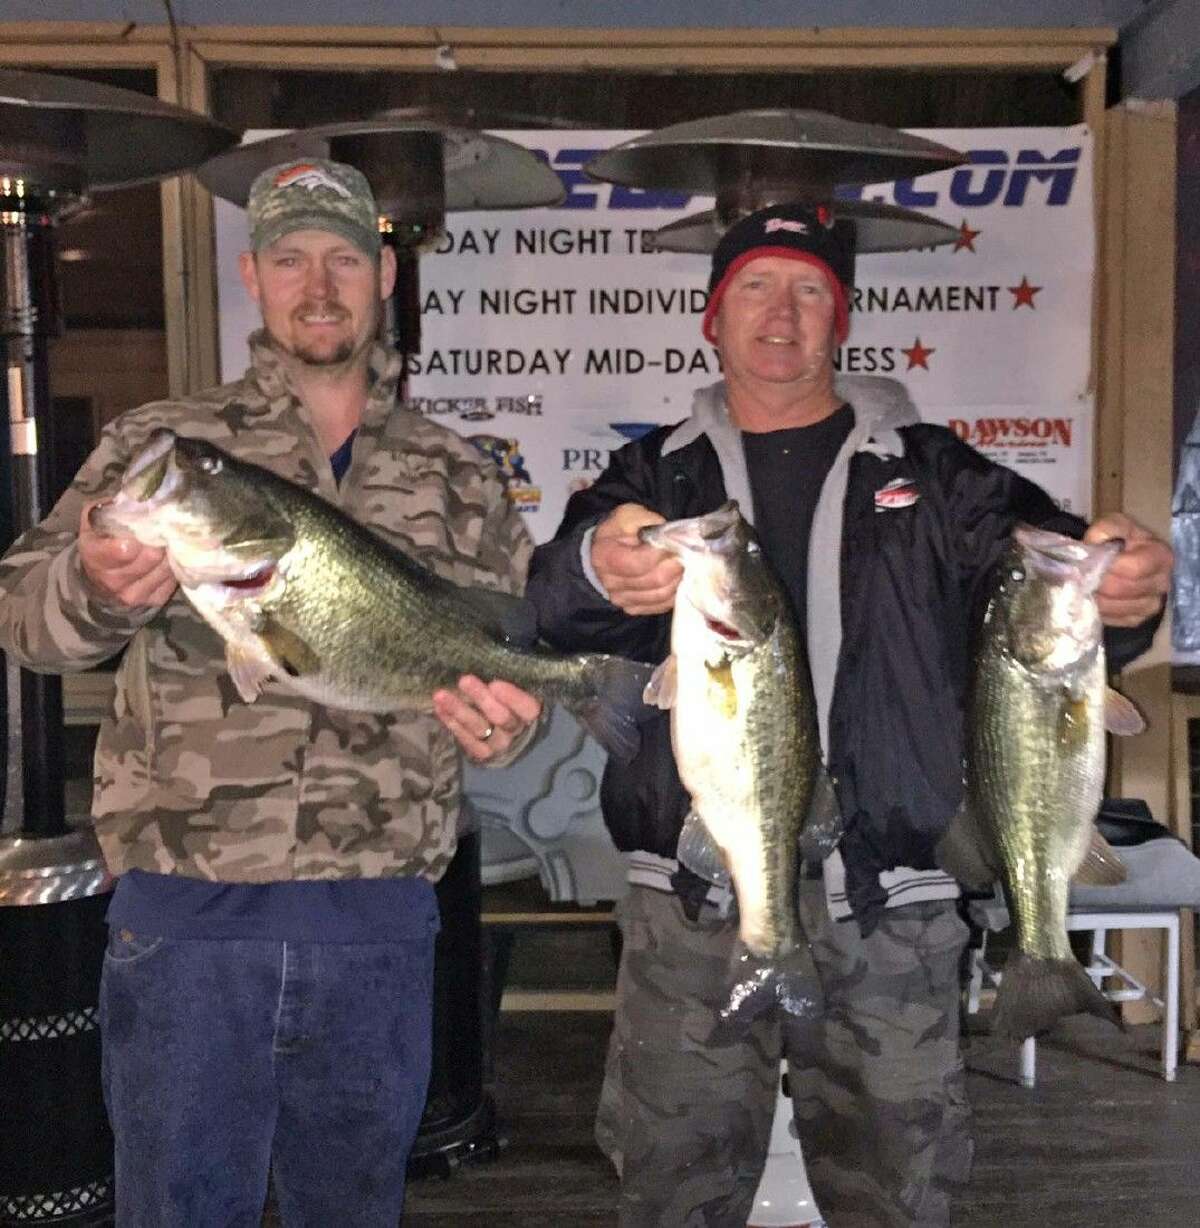 Evan and Tim Carlson came in second place in the CONROEBASS Tuesday tournament with a total stringer weight of 16.86 pounds. They also had big bass that weighed 8.29 pounds.